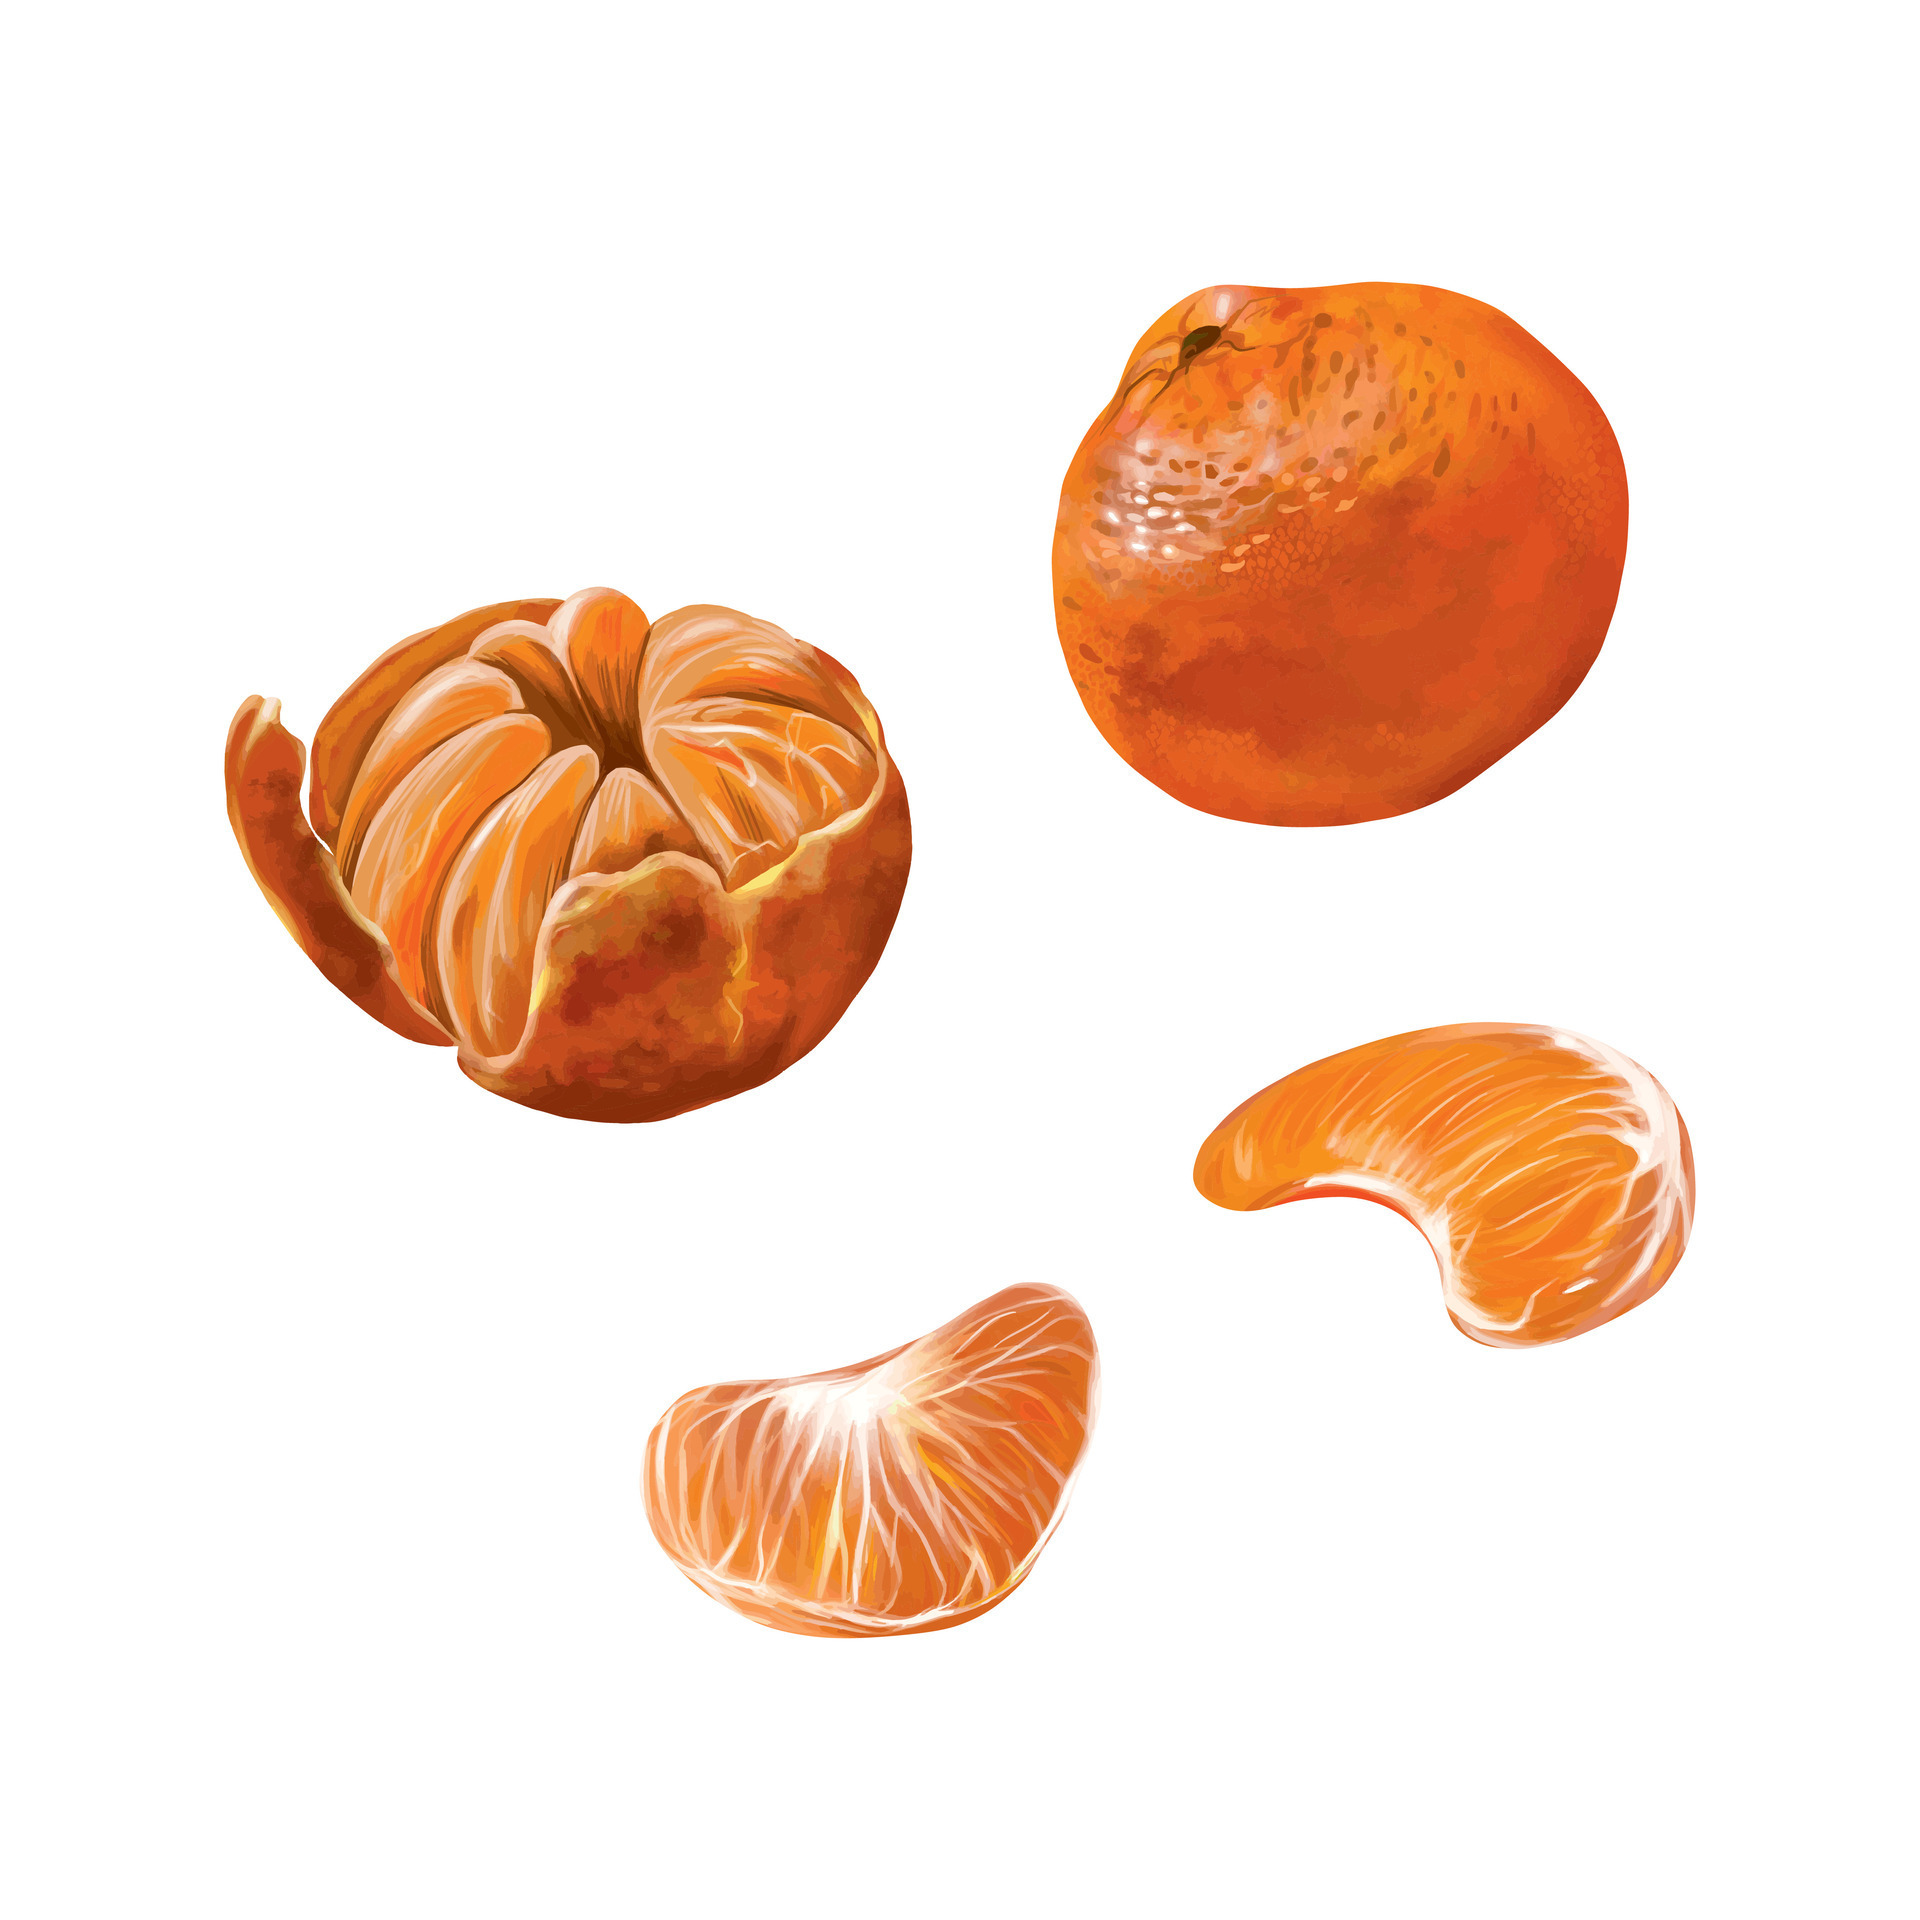 https://static.vecteezy.com/system/resources/previews/028/578/218/original/orange-tangerine-whole-and-slices-illustration-for-the-new-year-composition-design-element-for-greeting-cards-christmas-invitations-themed-banners-flyers-vector.jpg